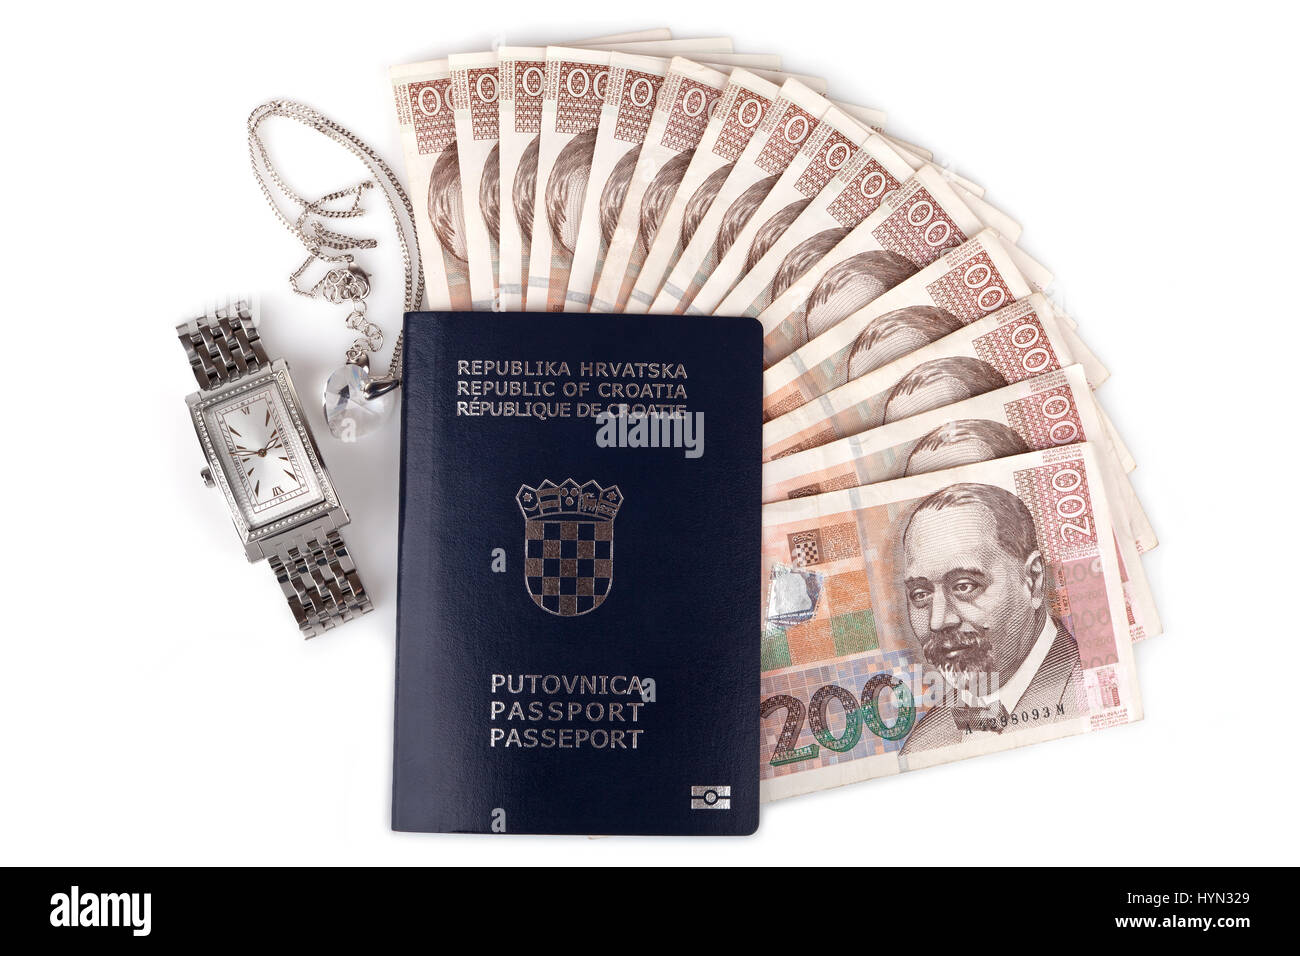 Croatian passport with valuables, isolated on white Stock Photo